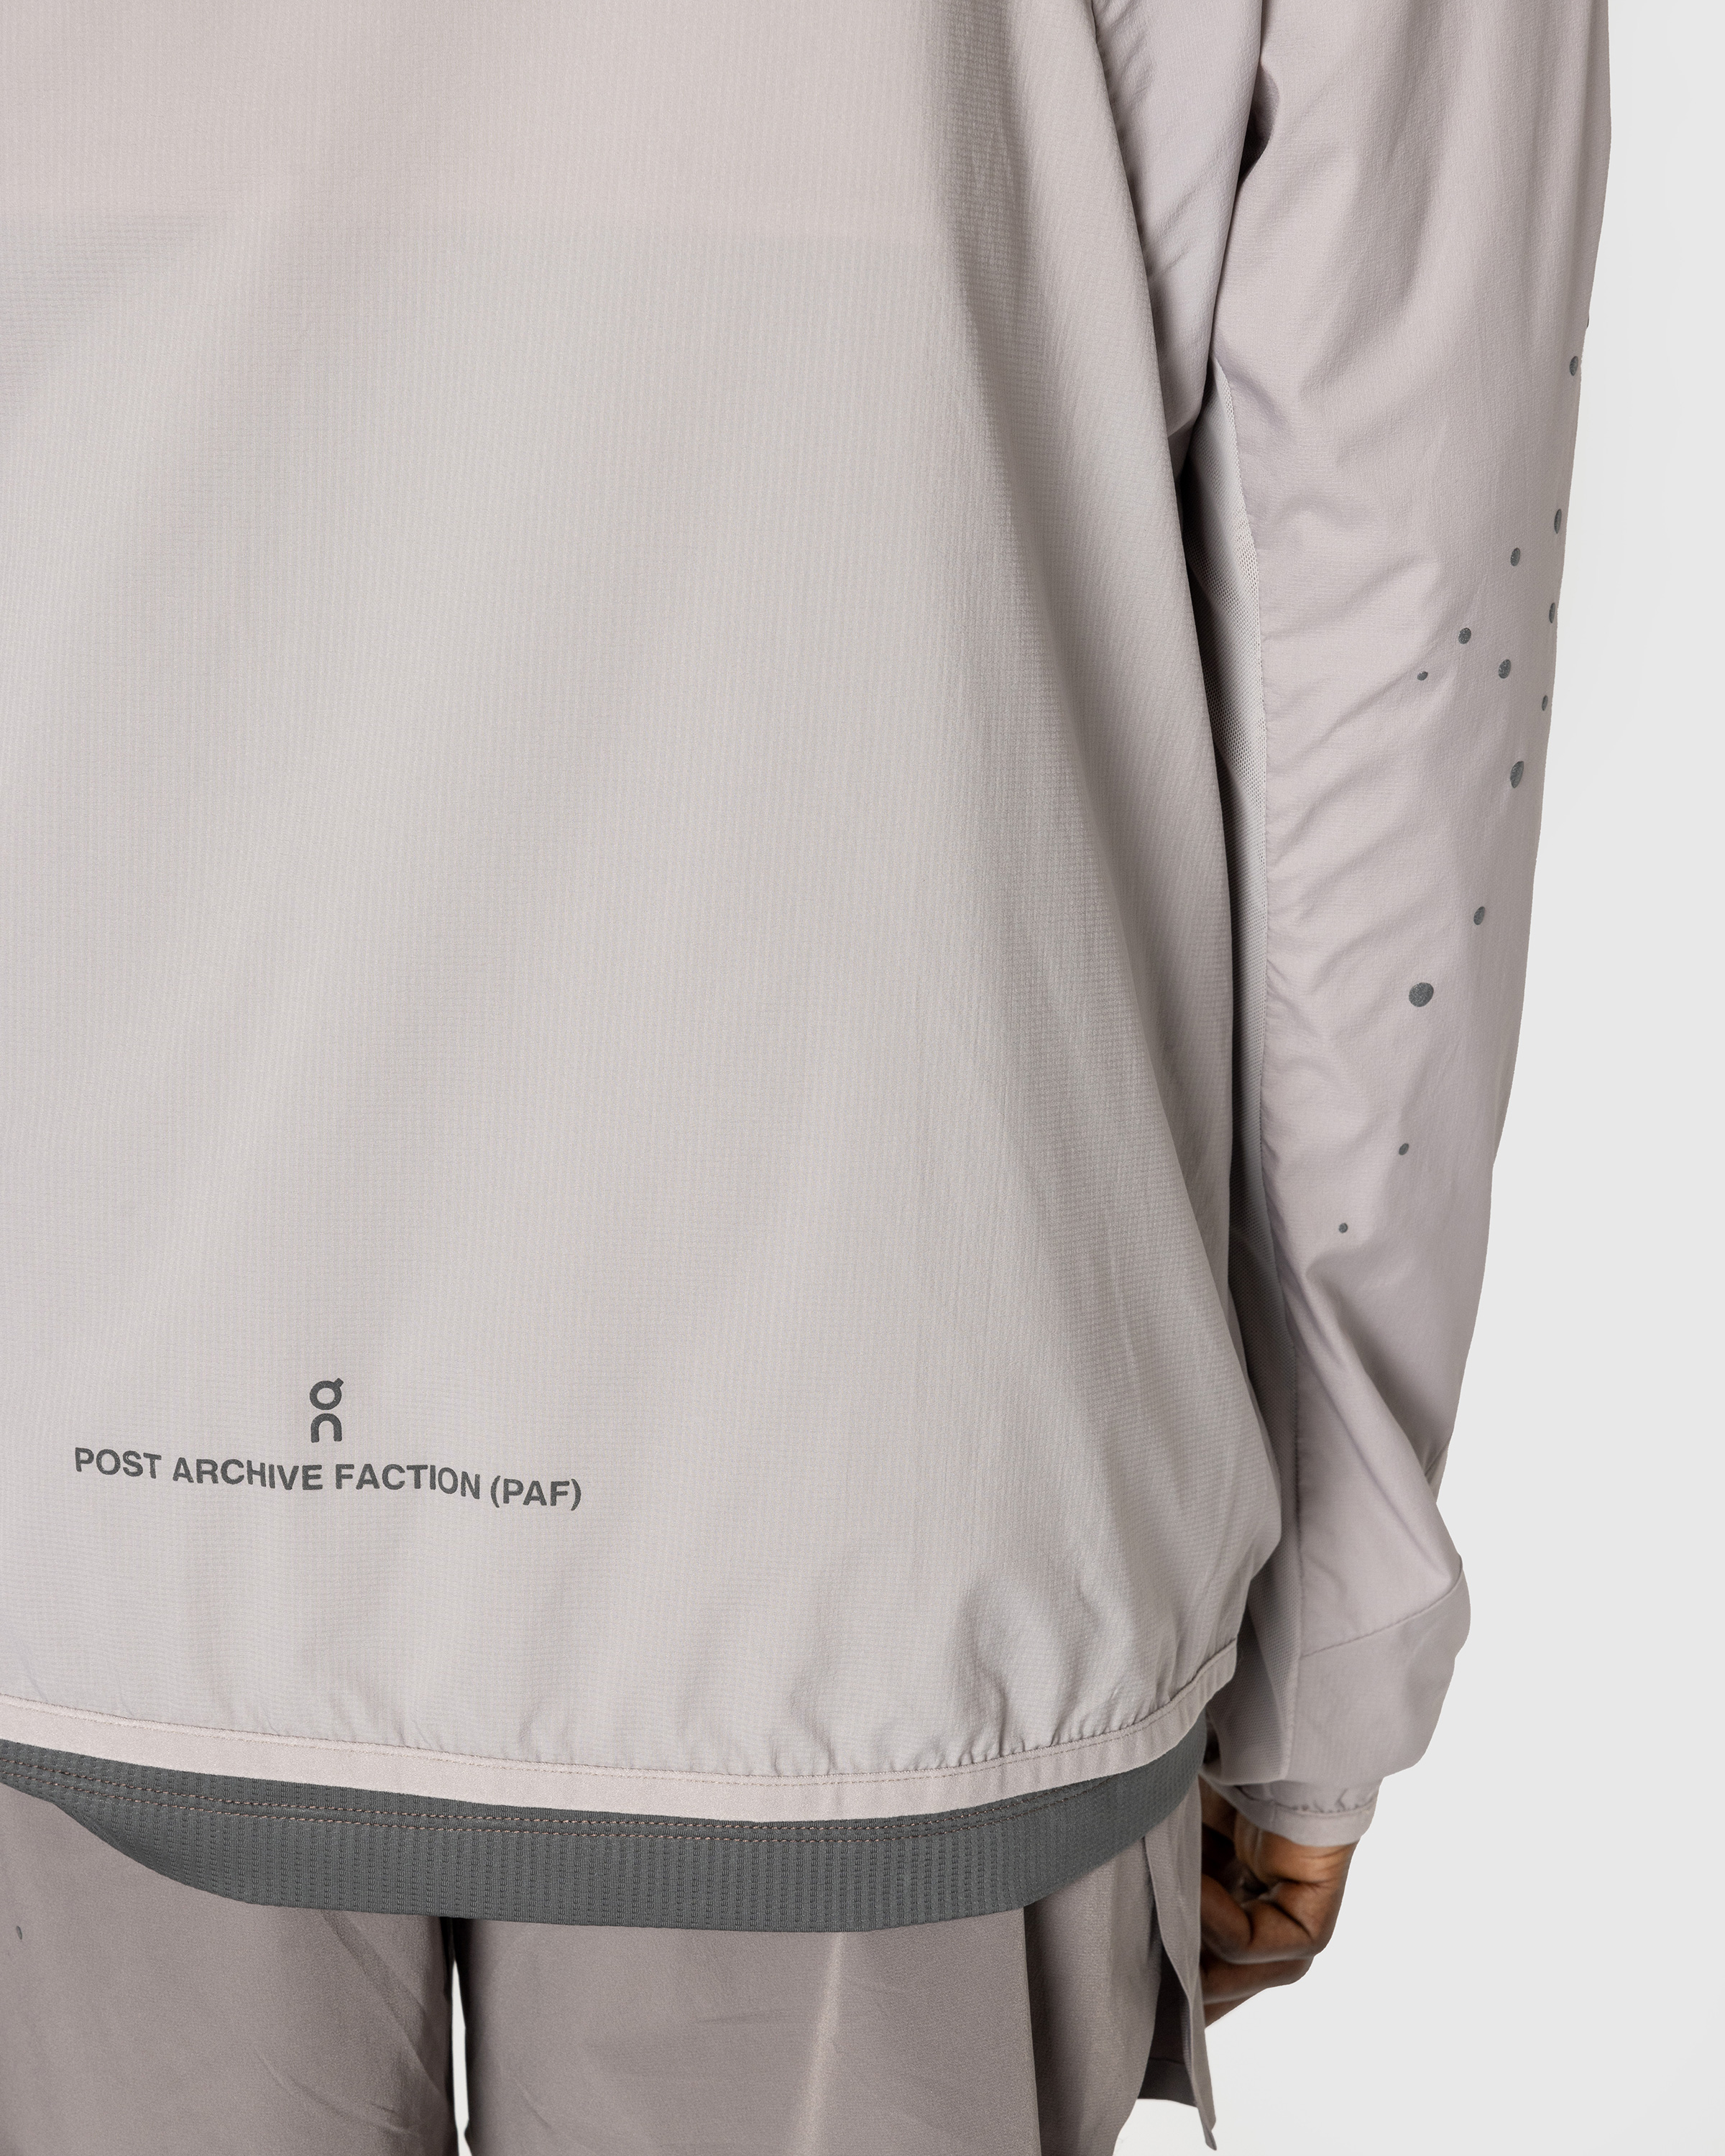 On x Post Archive Faction (PAF) – Running Jacket Zinc - Outerwear - Grey - Image 6